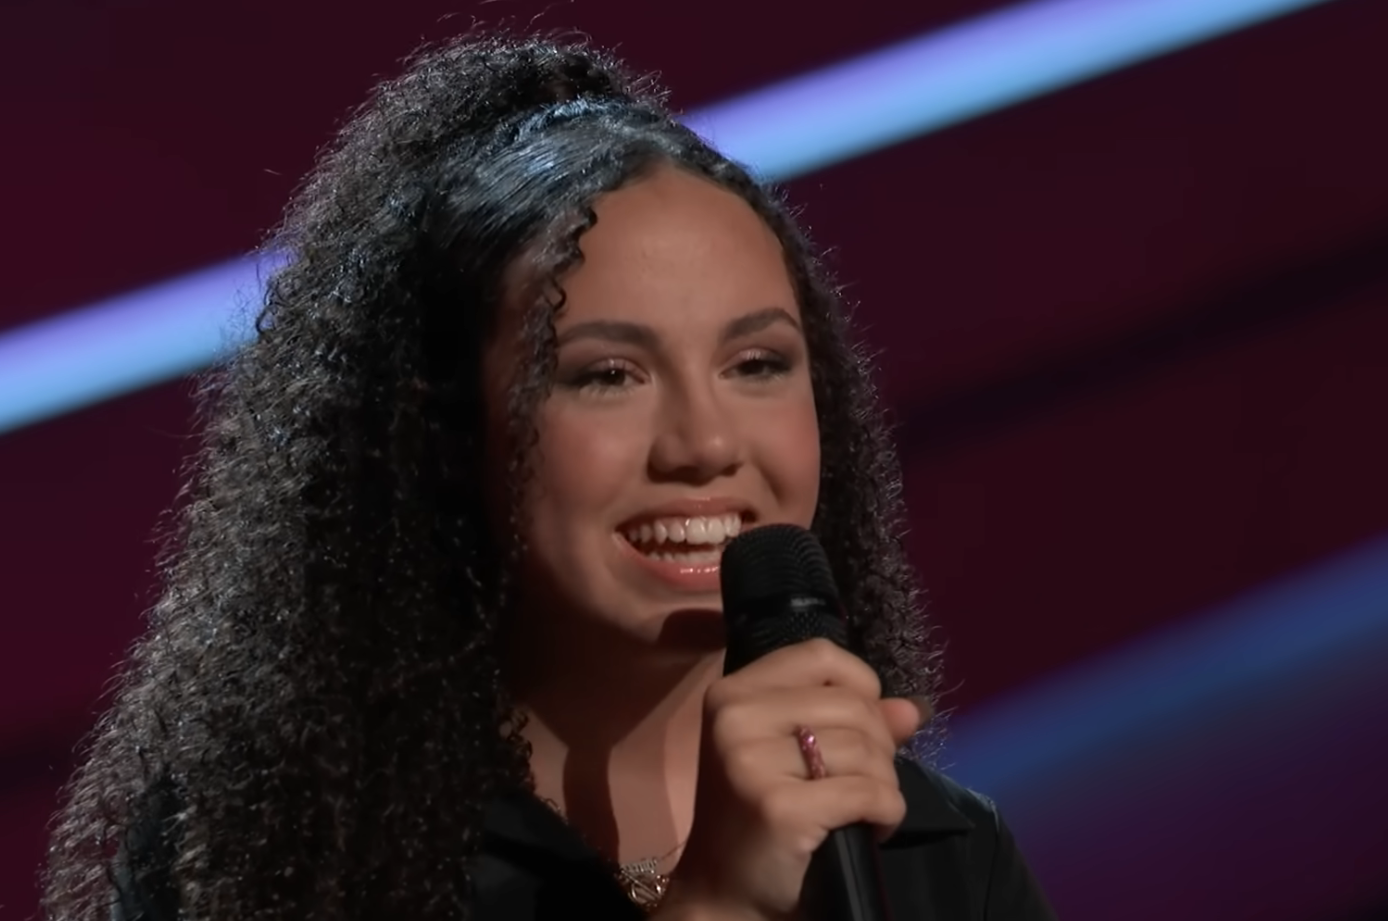 The Voice': Maddi Jane, Nadége deliver soulful battle for Team Chance